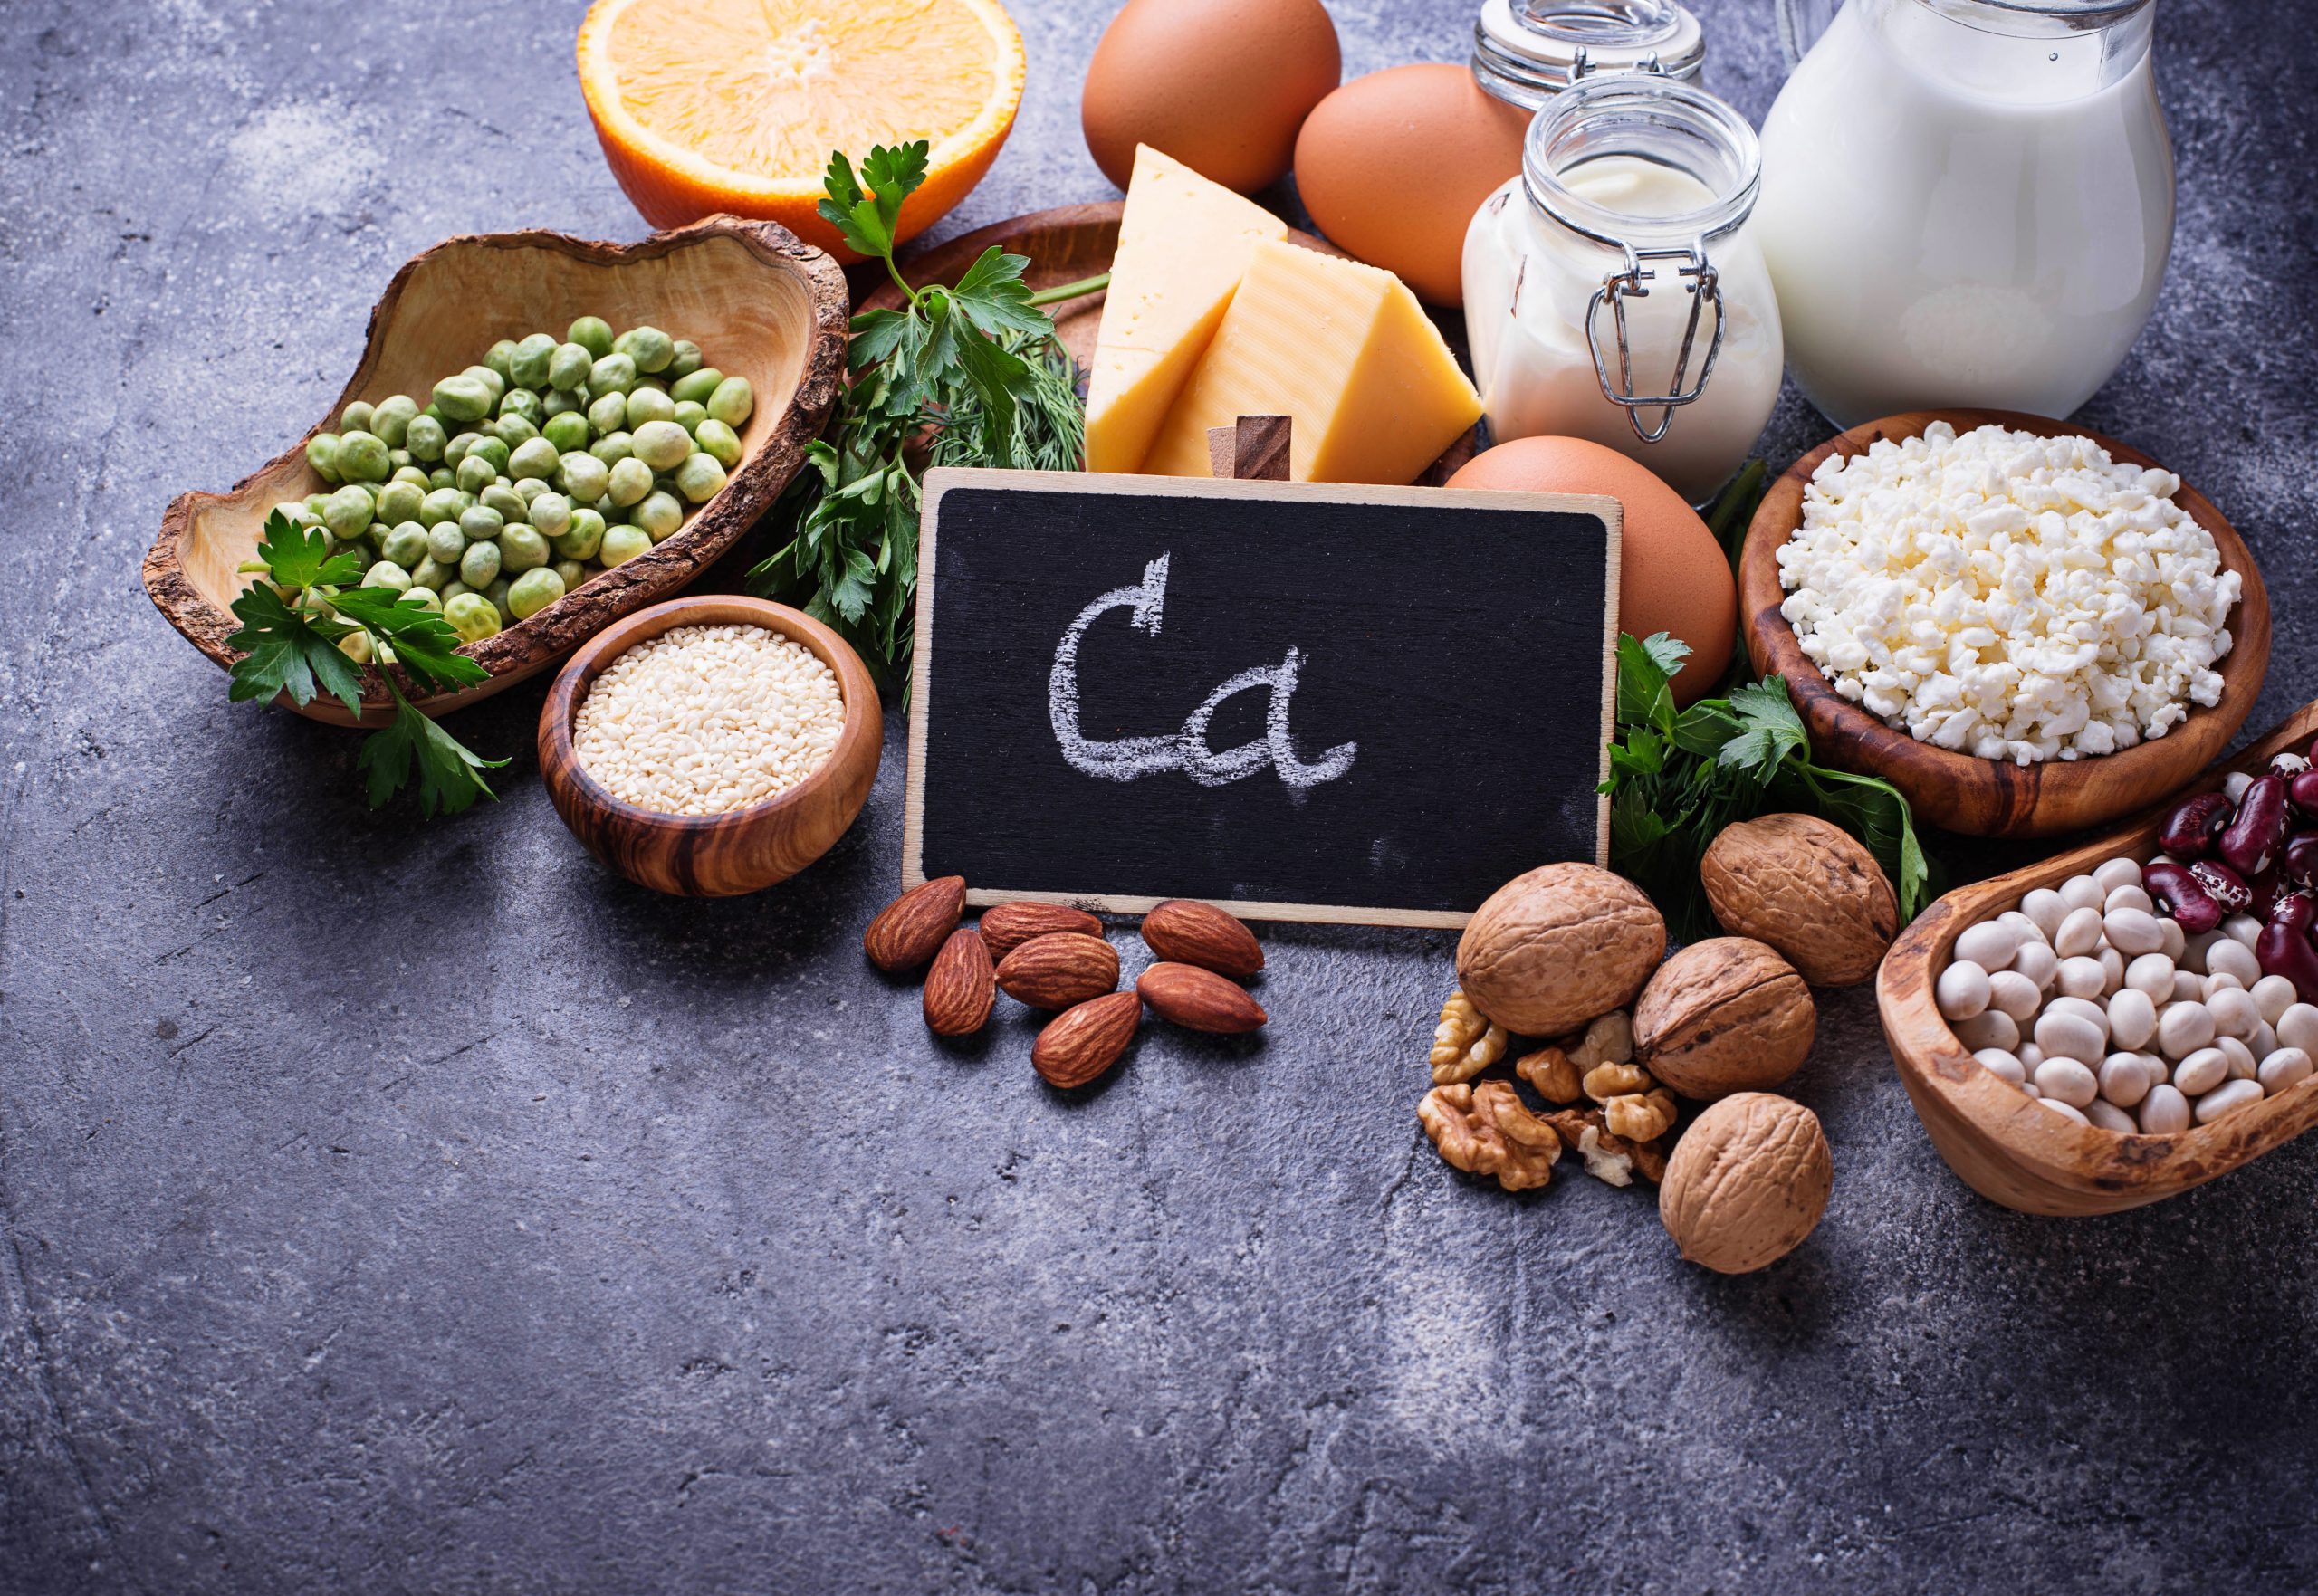 Edition 41 – Improvement in calcium intake in the Asian population: A narrative review